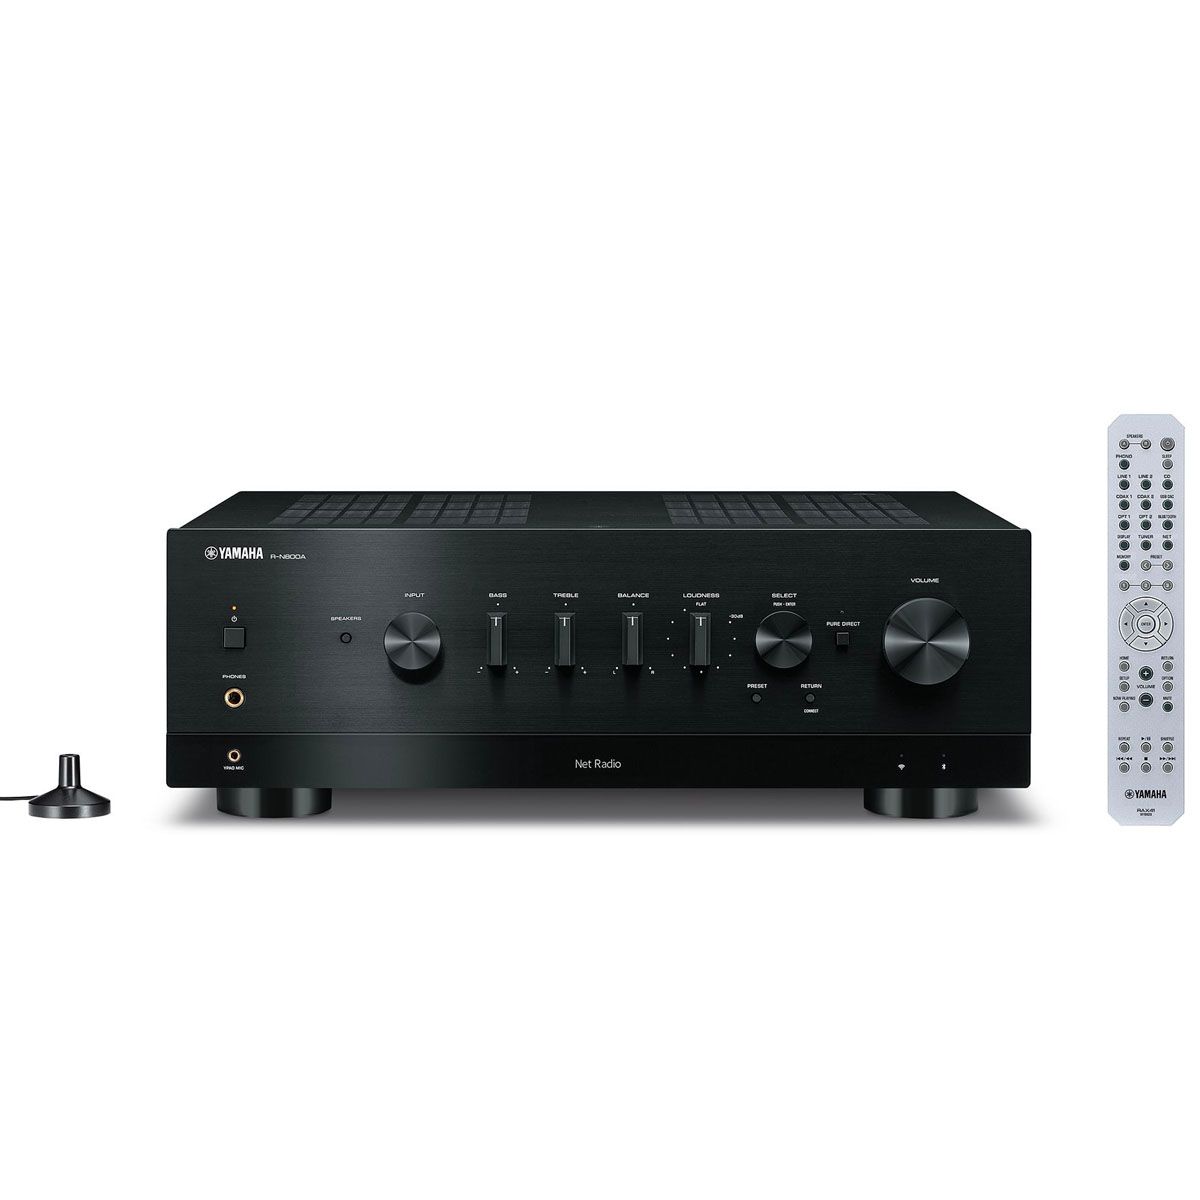 Yamaha R-N800A Network Stereo Receiver - Black front view with remote and calibration microphone